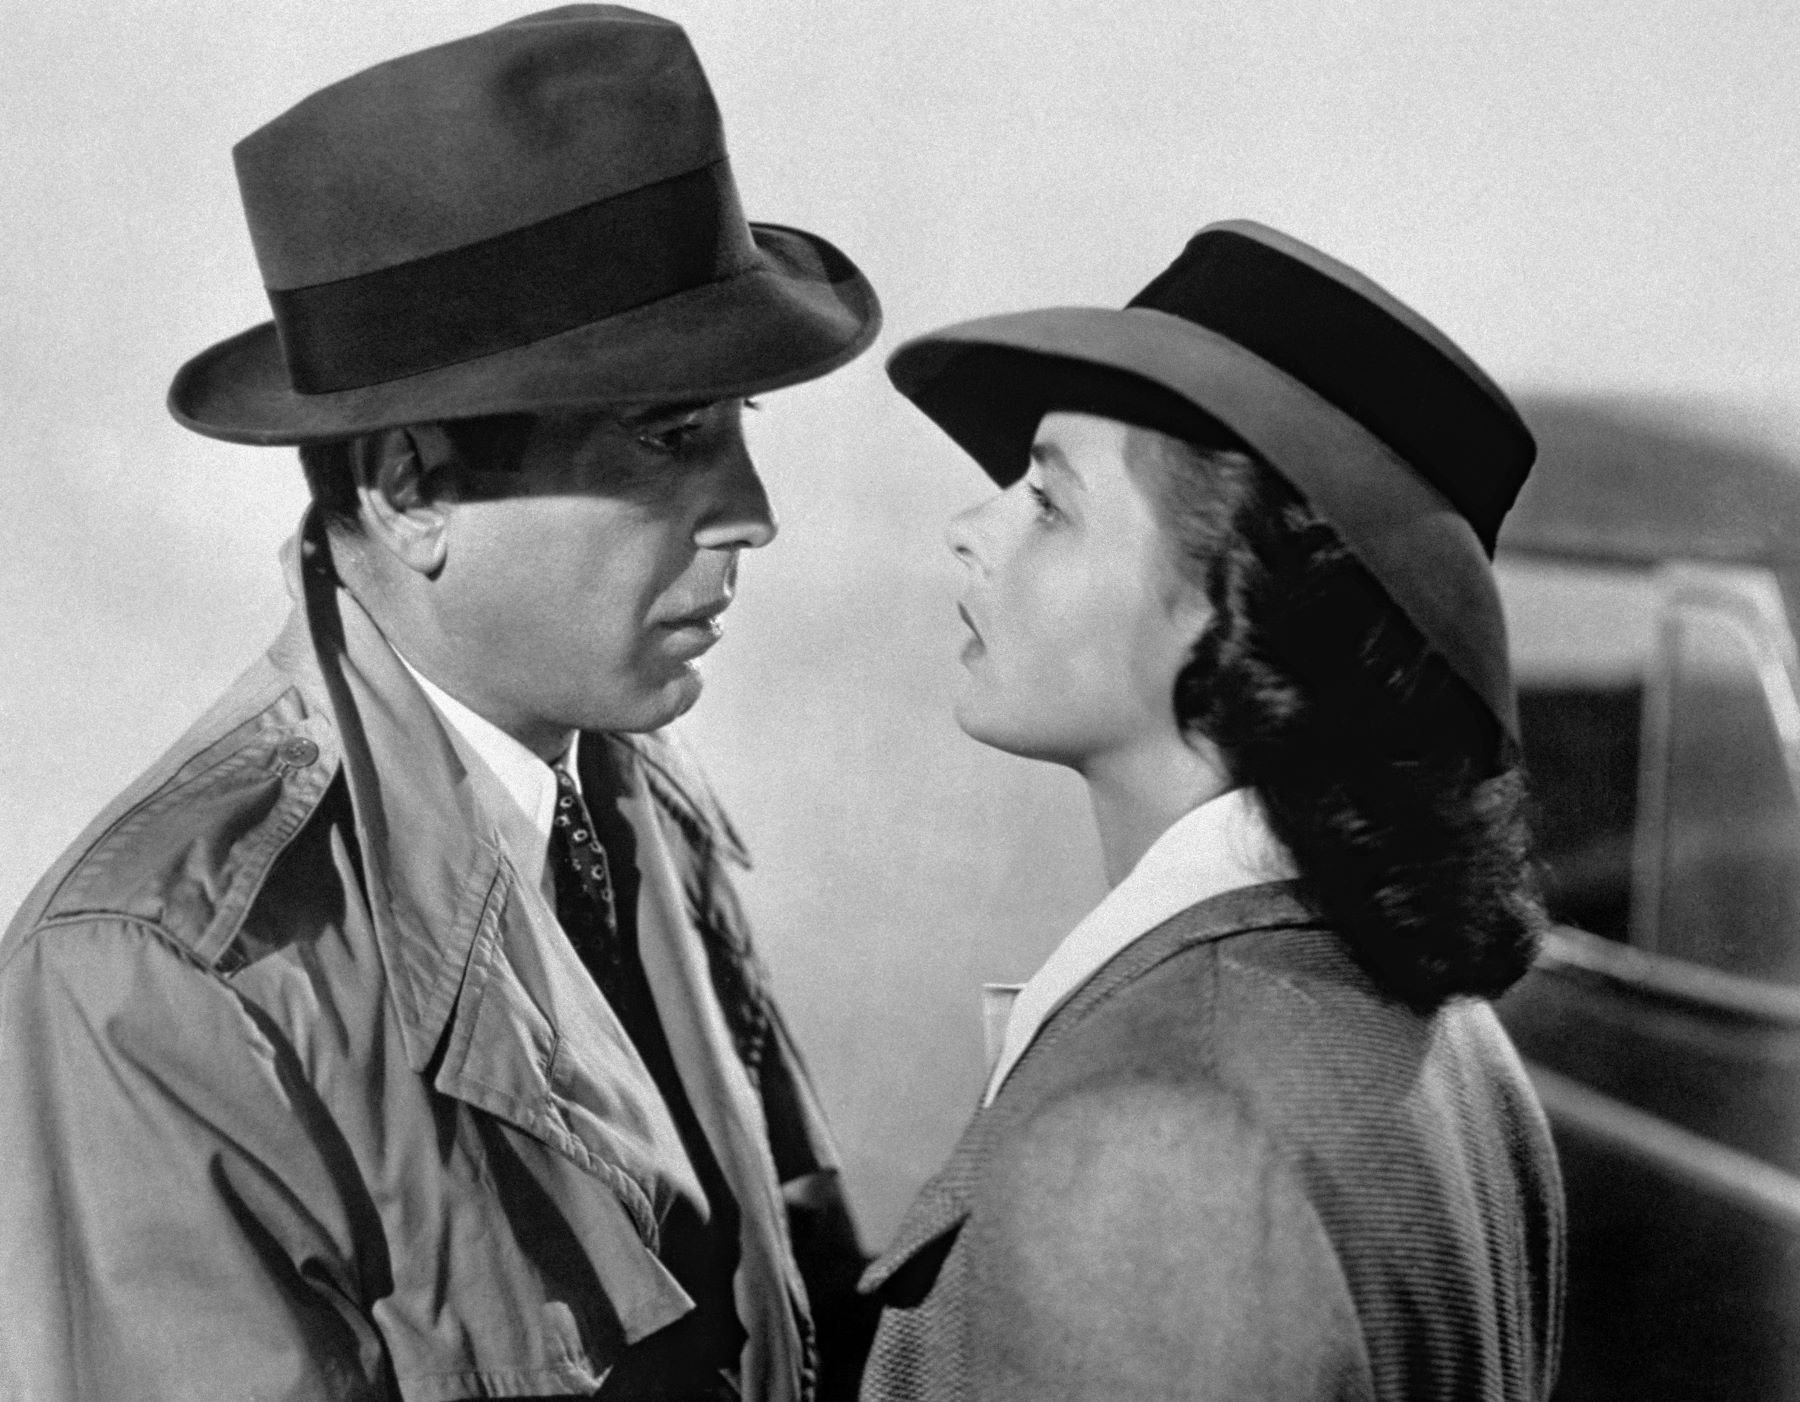 Humphrey Bogart Improvised 1 of the Most Famous Lines From ‘Casablanca’